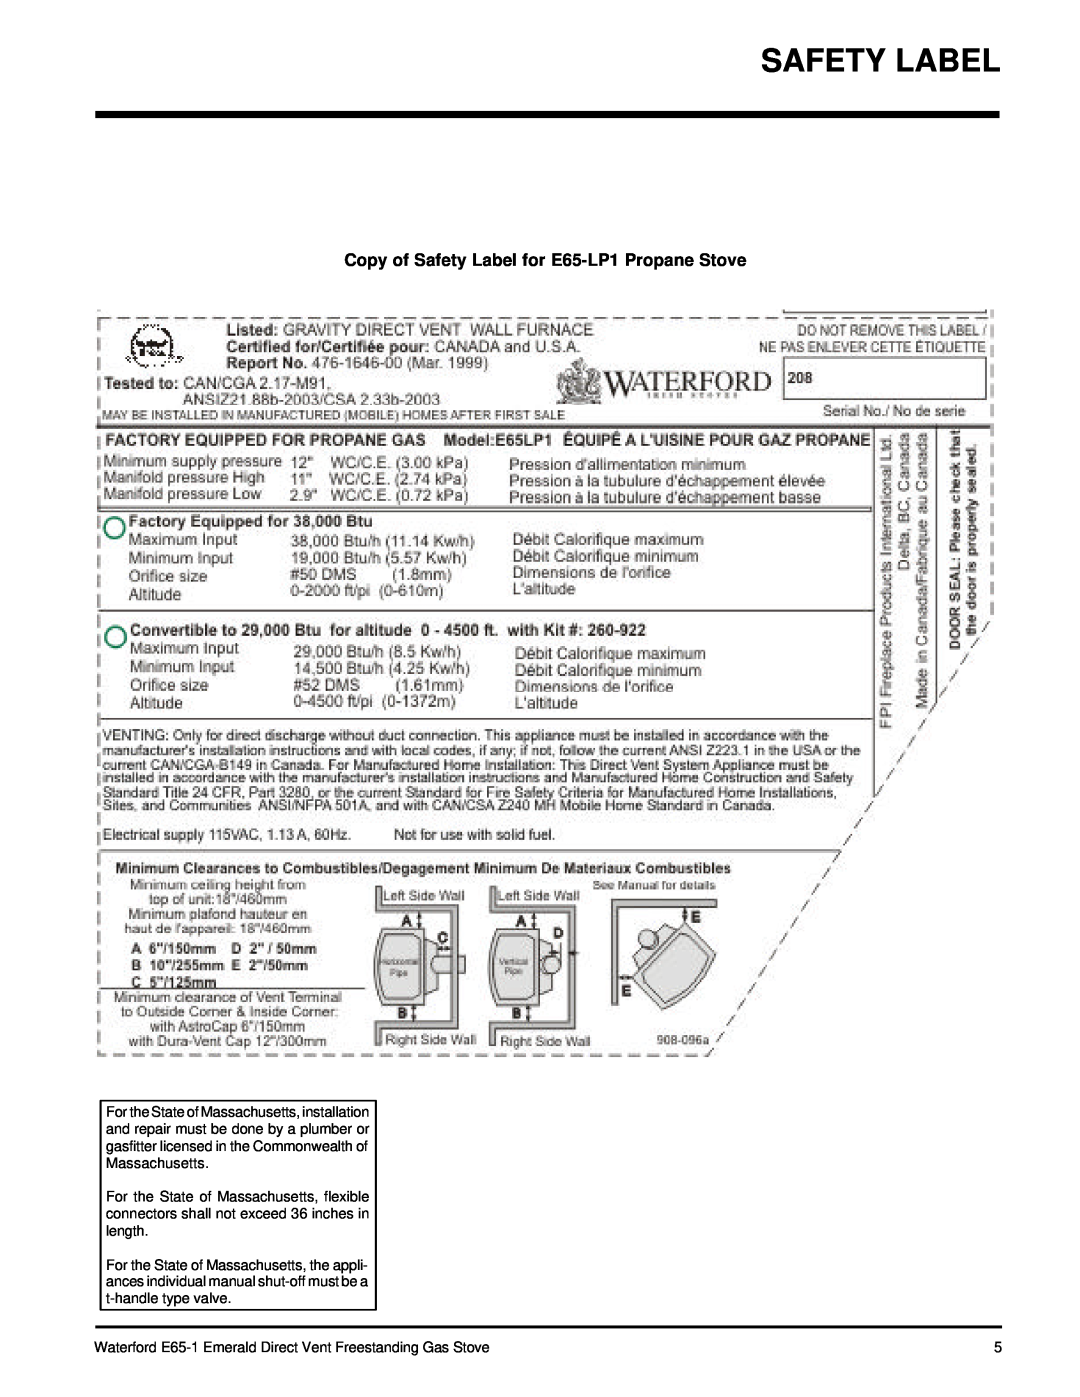 Waterford Appliances E65-NG1 installation manual Copy of Safety Label for E65-LP1Propane Stove 